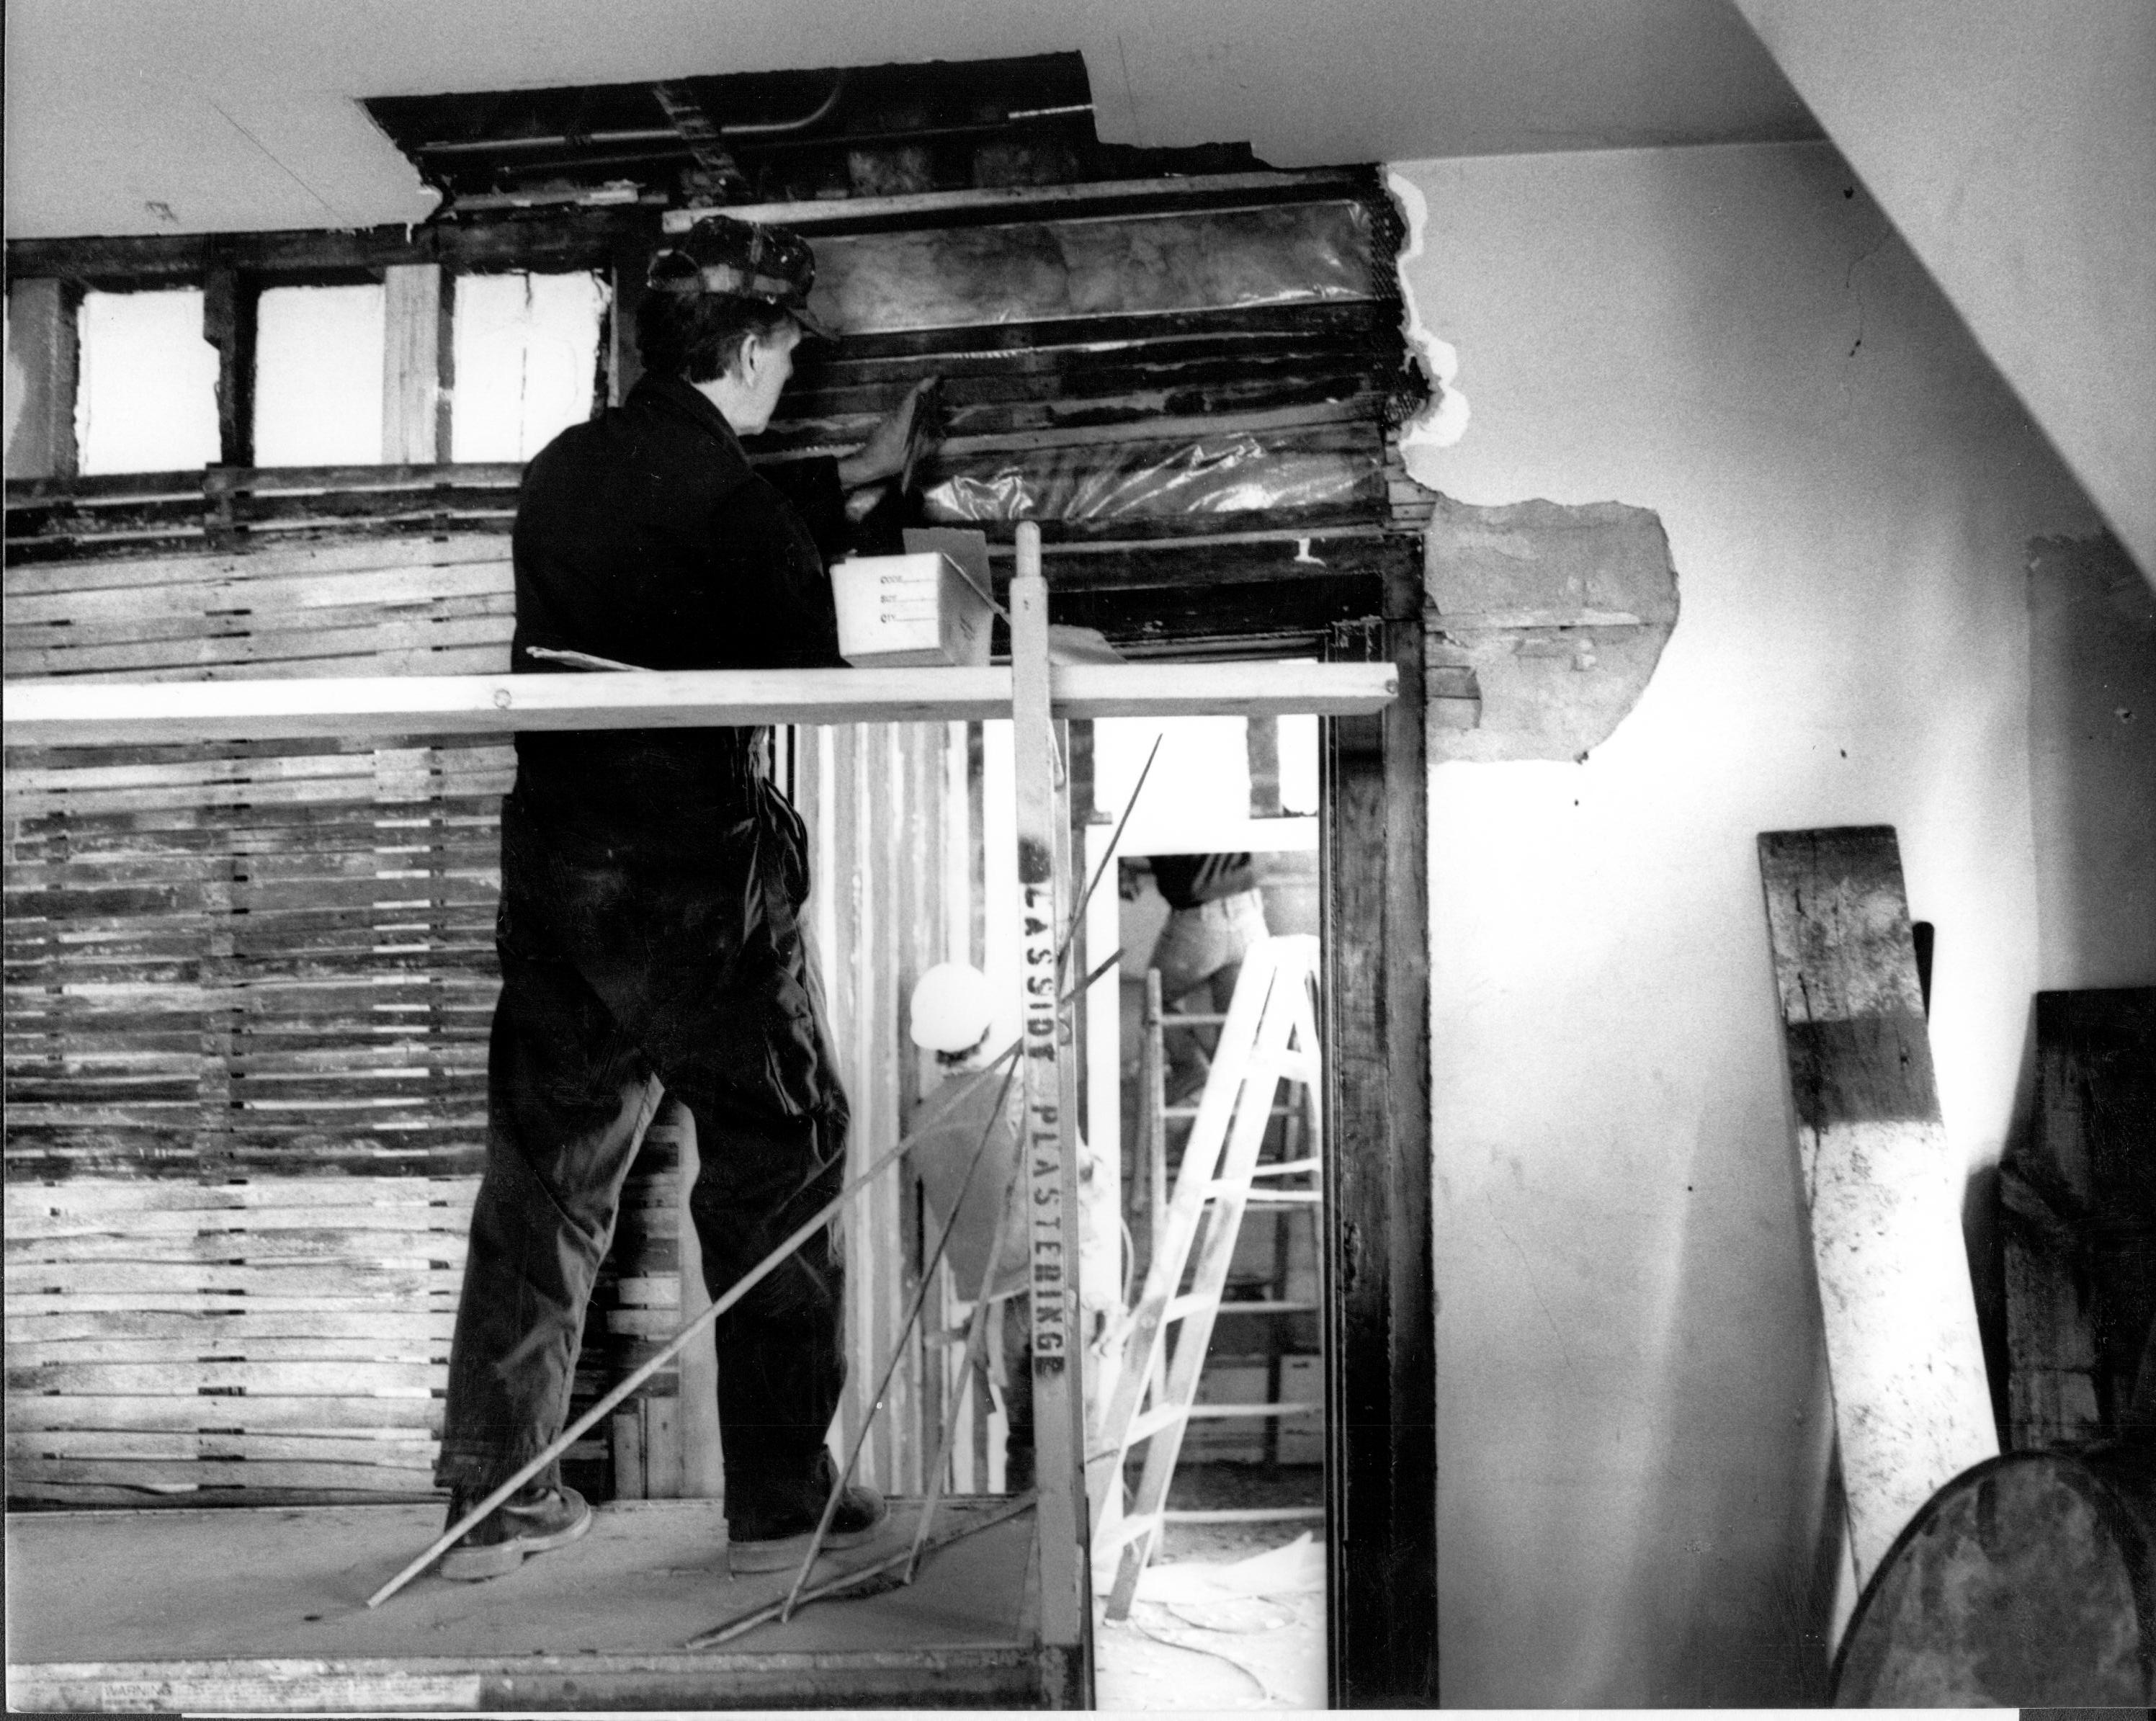 Joe Pree is preparing the interior wall of the kitchen in Lincoln's Home before repairing the plaster. Wherever possible, the original plaster and wall finishes are being preserved. The anticipated completion date for the project is June 16, 1988. Kitchen Lincoln, Home, Restoration, kitchen